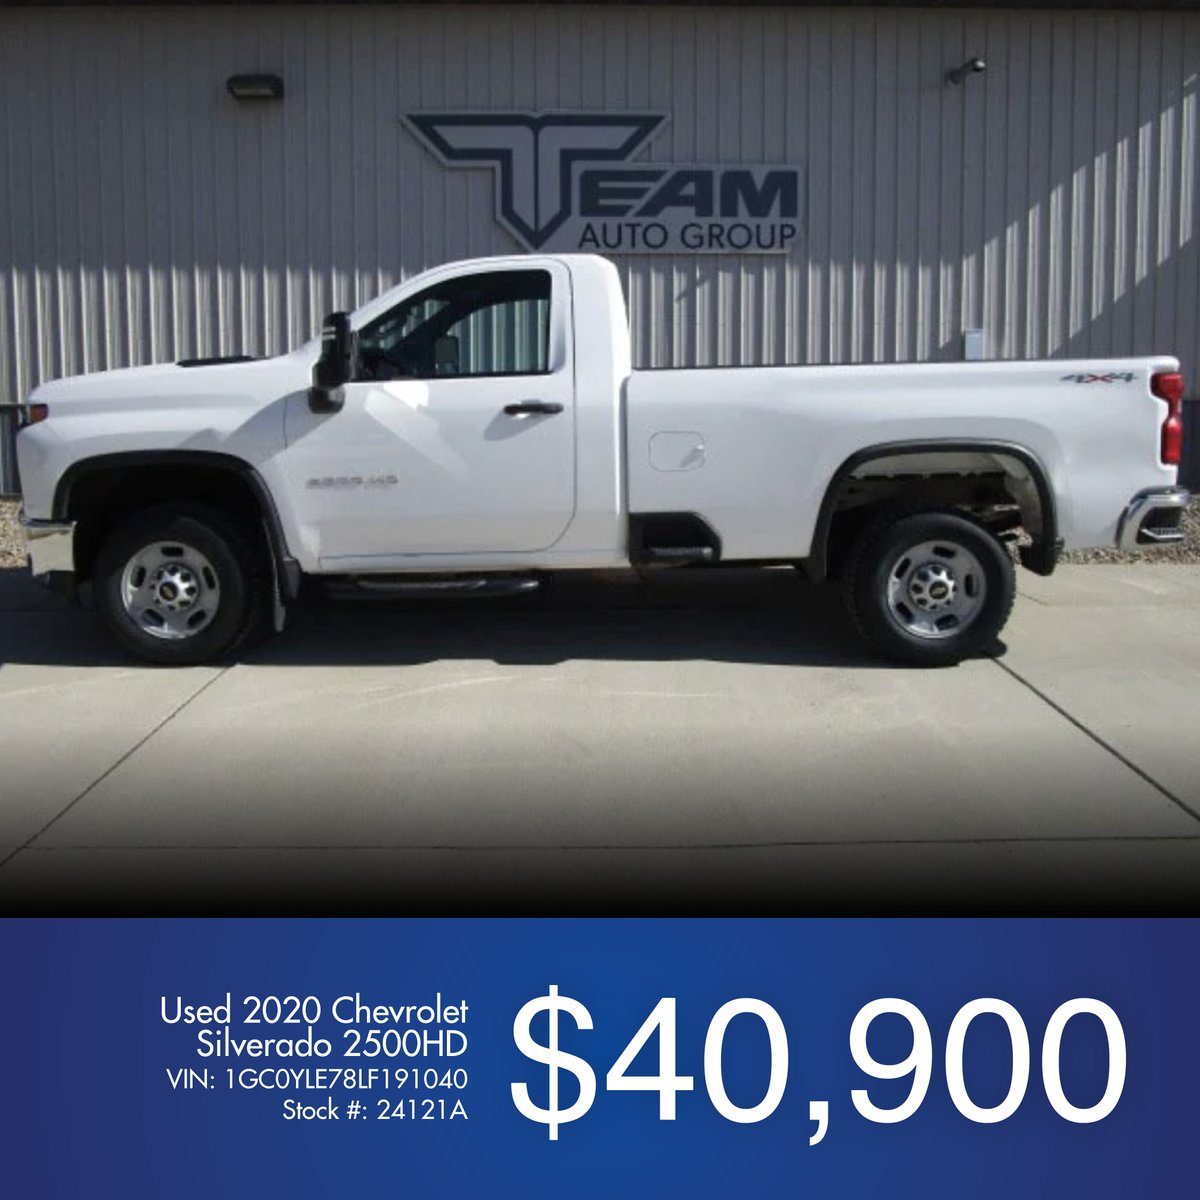 Are you ready to upgrade your work truck? This 2020 #Chevrolet 2500HD is designed to combine strength, versatility, and comfort, the ultimate companion for both work and play.

View it » bit.ly/43EpmZi 

#WorkTruck
#Silverado
#TeamAutoGroup